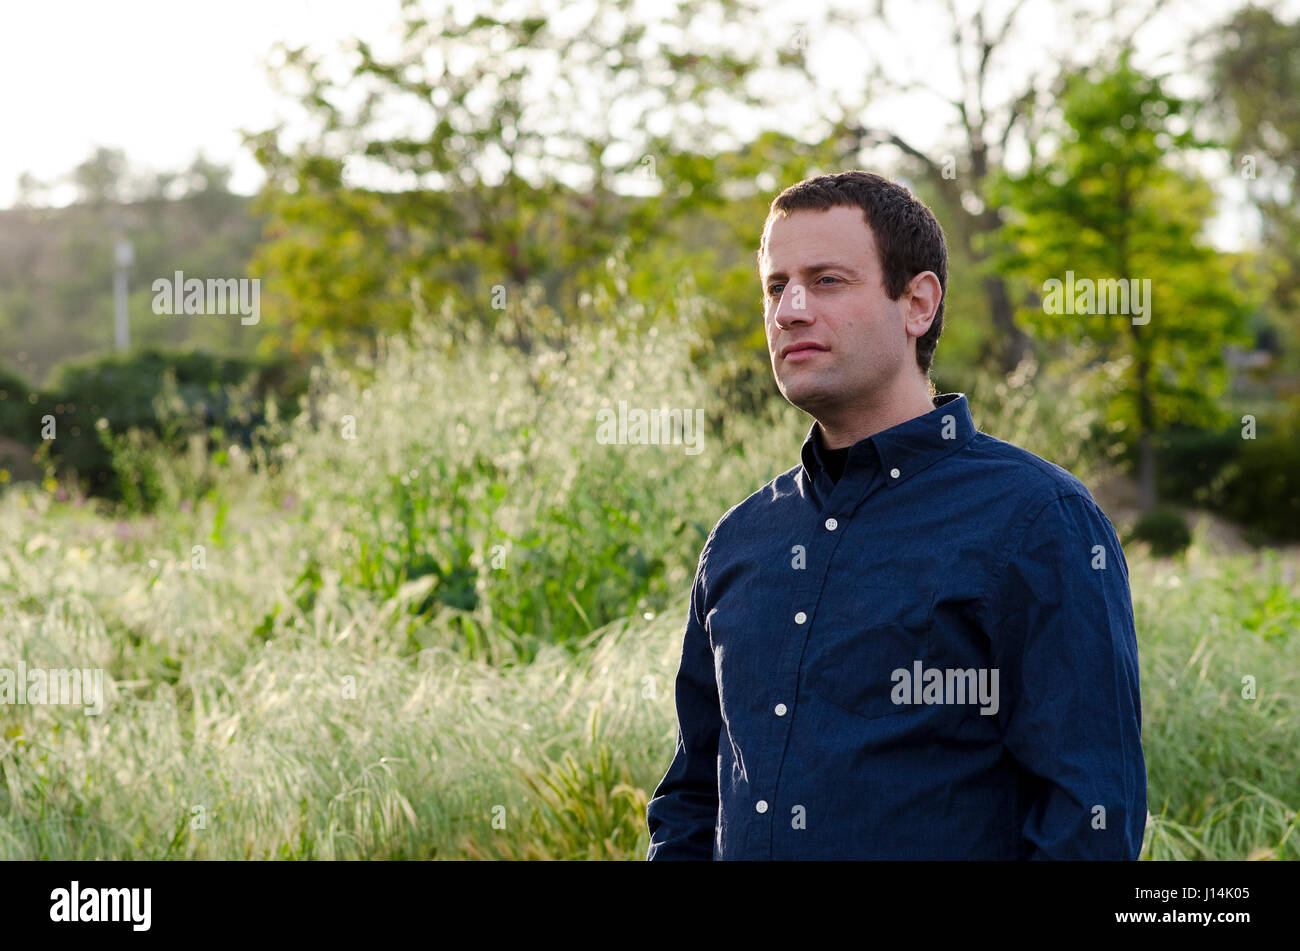 Man looking forward to the future in a grassy field with arms crossed. Stock Photo